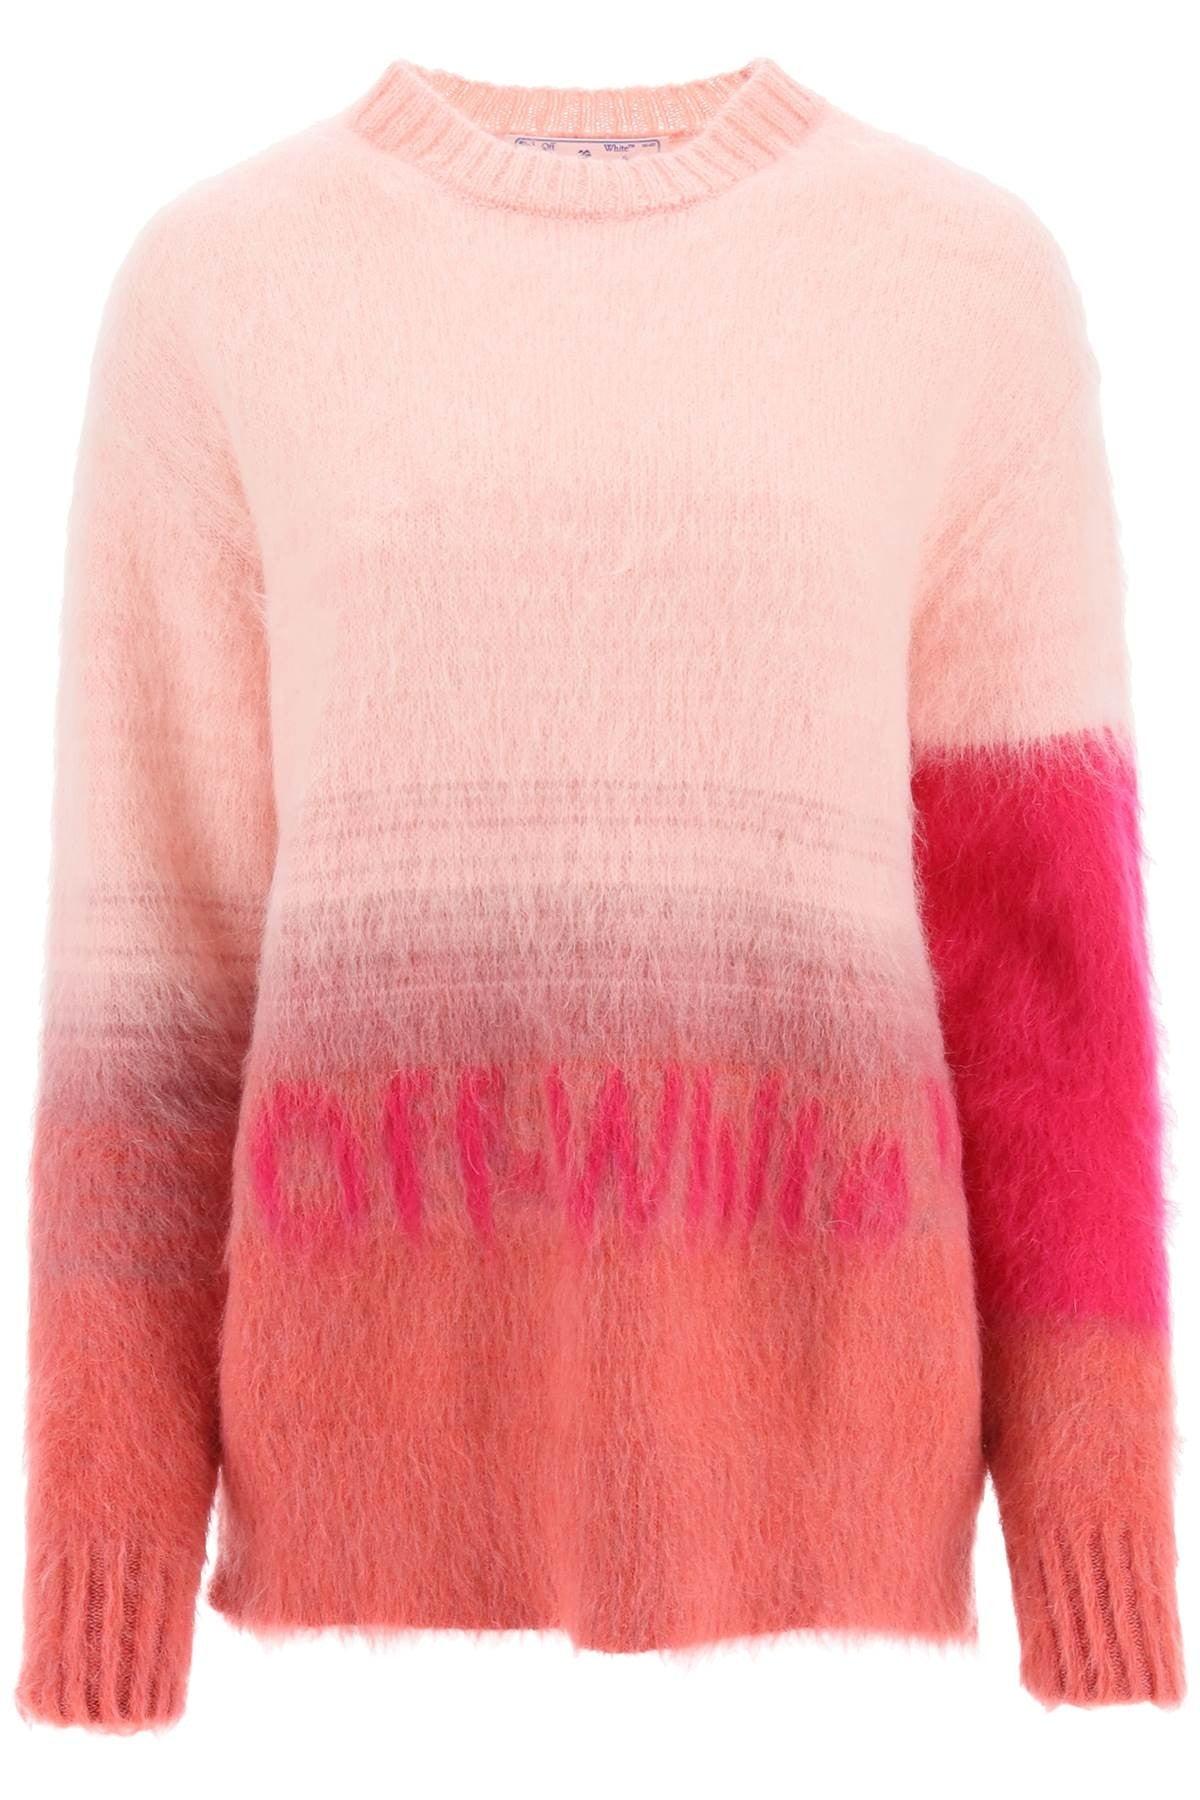 Off-White c/o Virgil Abloh Helvetica Logo Mohair Sweater in Pink | Lyst